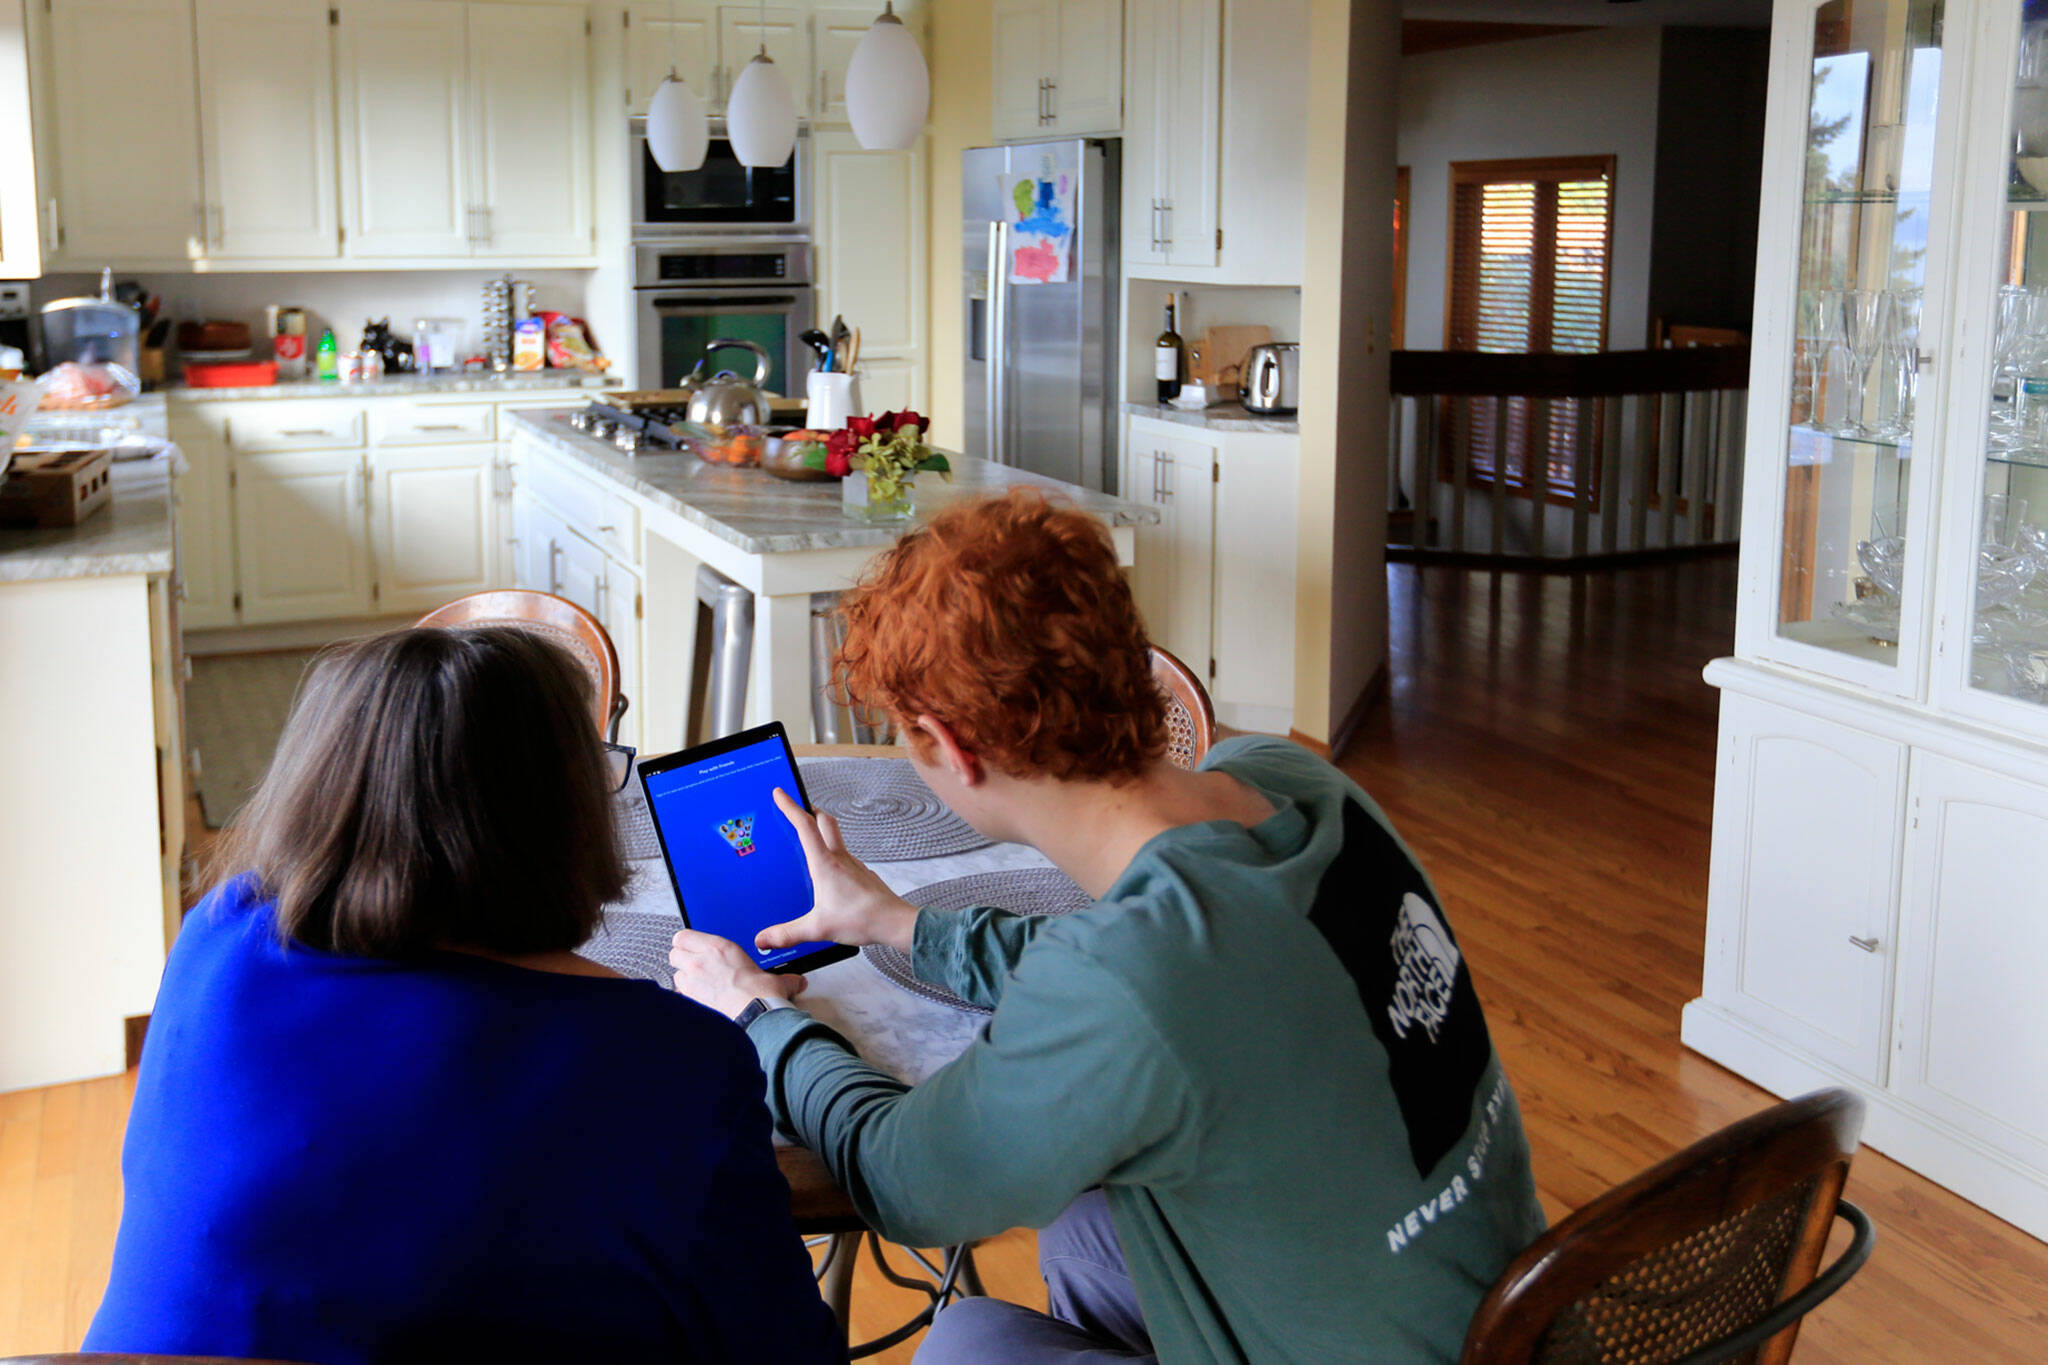 Jack Rice (left) gives his grandmother Carolyn Rice a tutorial on her new tablet. (Kevin Clark / The Herald)